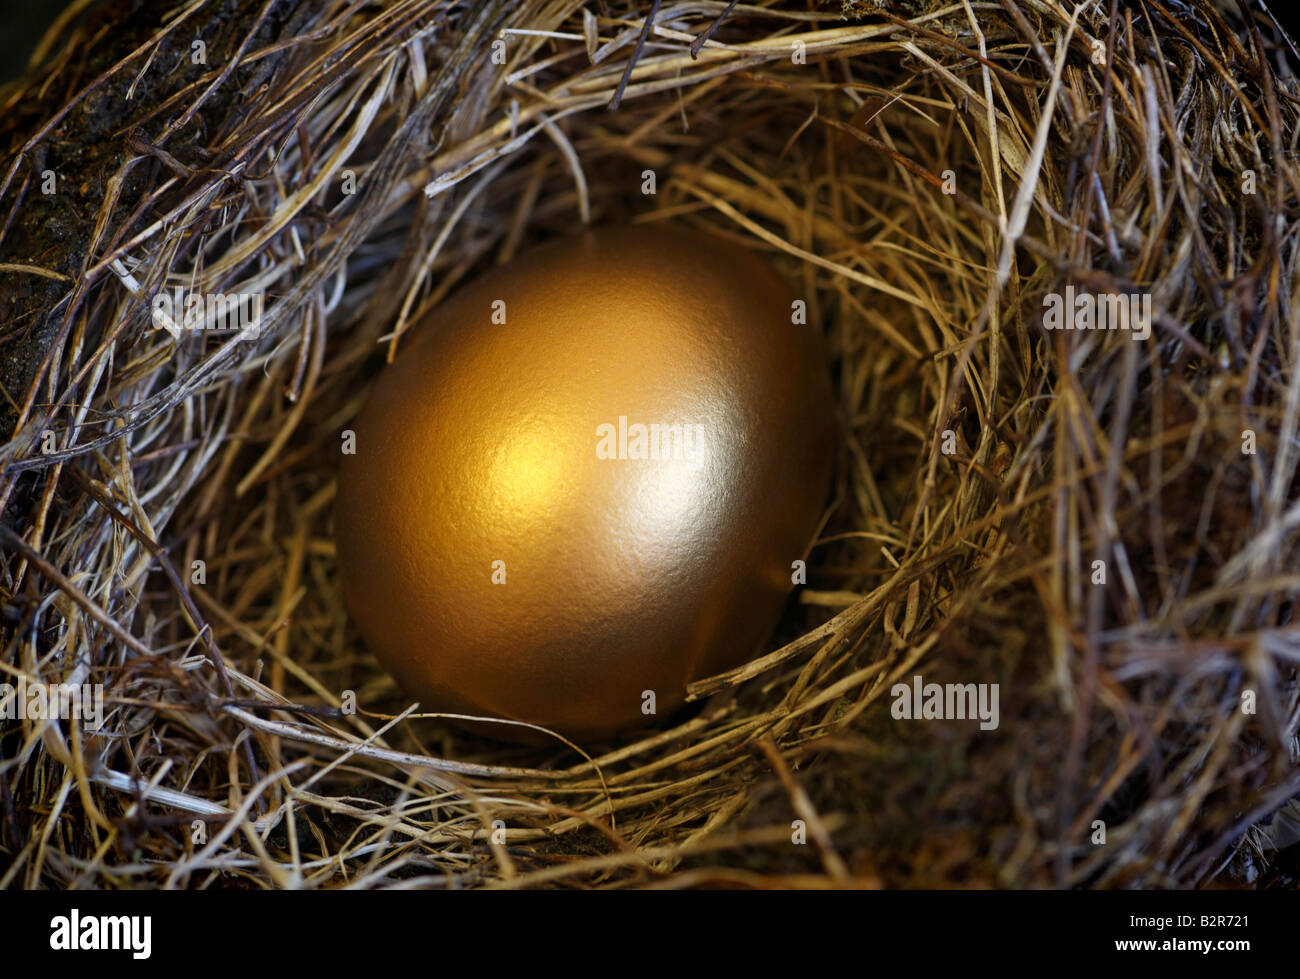 A golden egg in a nest. Stock Photo